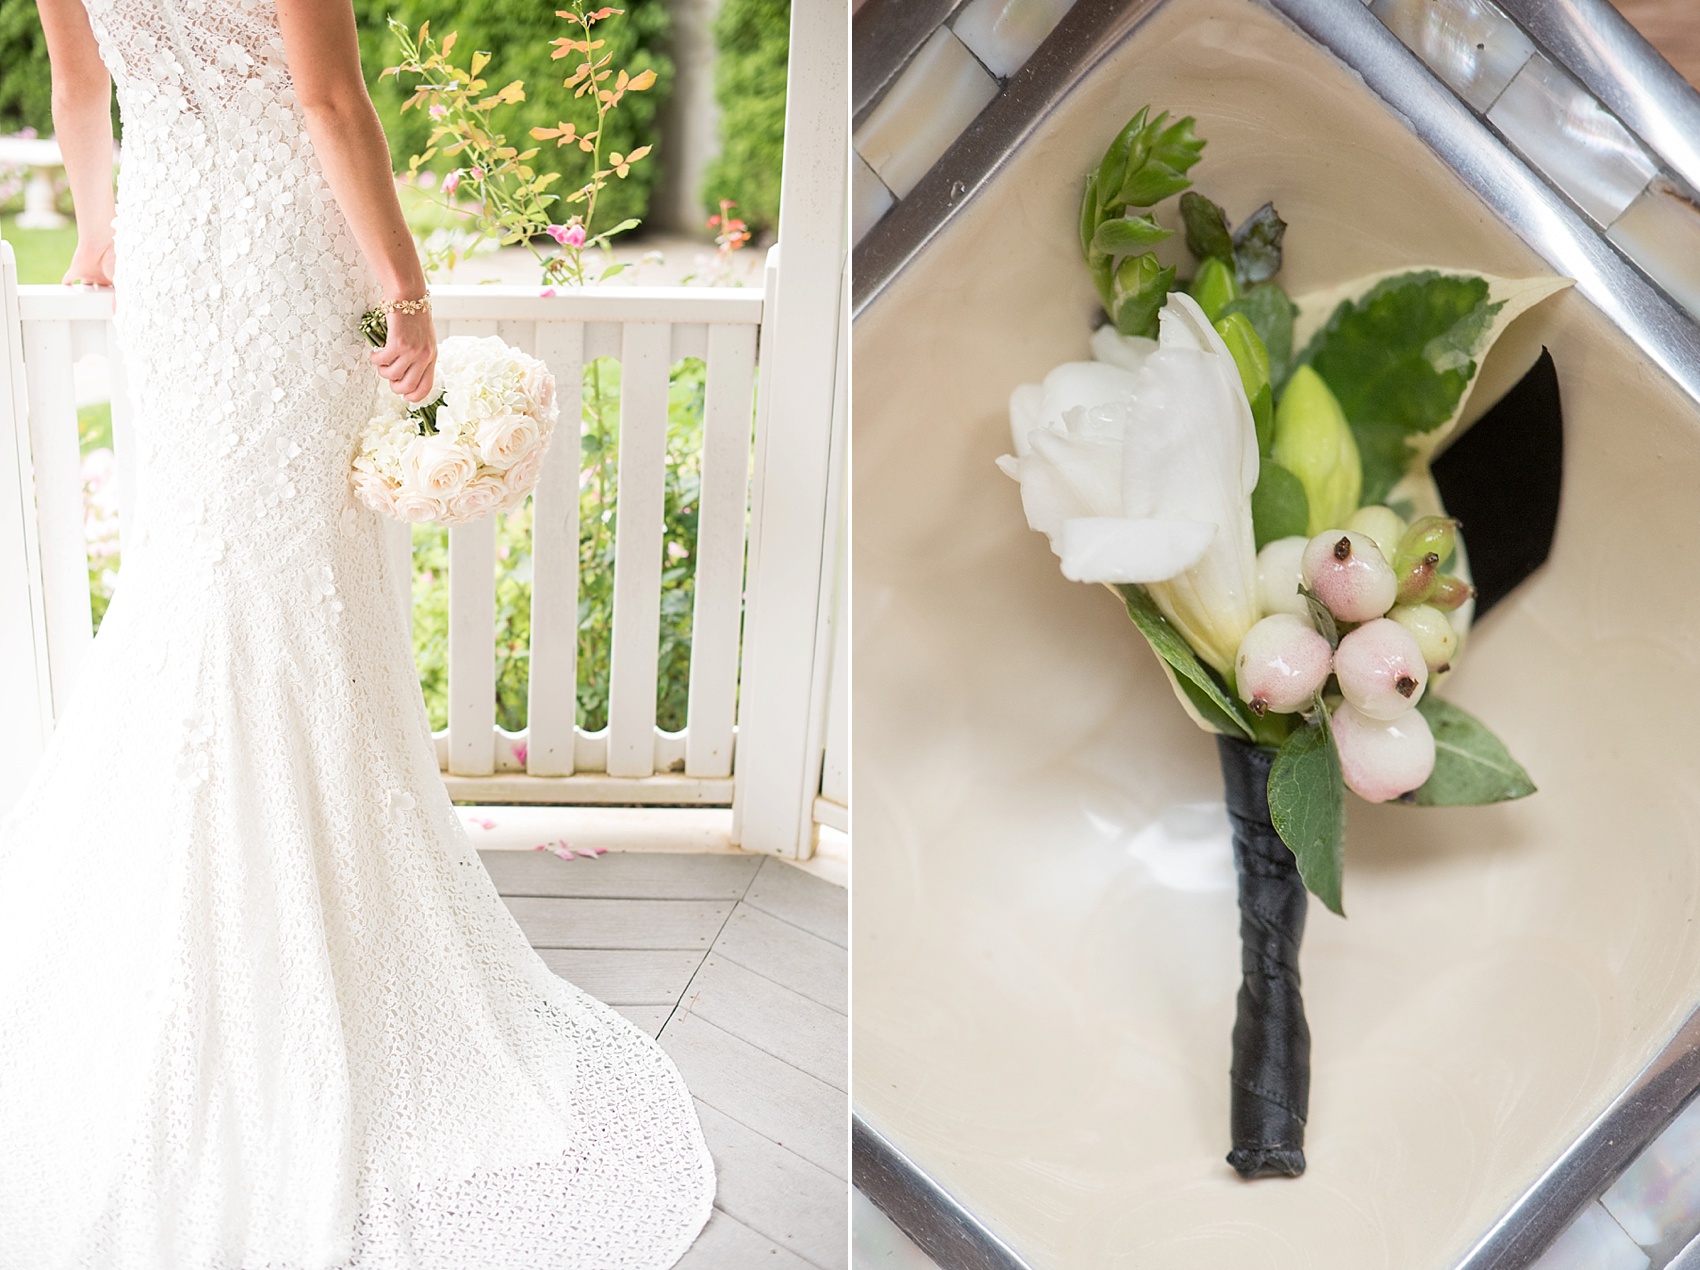 Bride in her lace gown and boutonniere with pink berries. Images by NYC wedding photographer Mikkel Paige Photography.